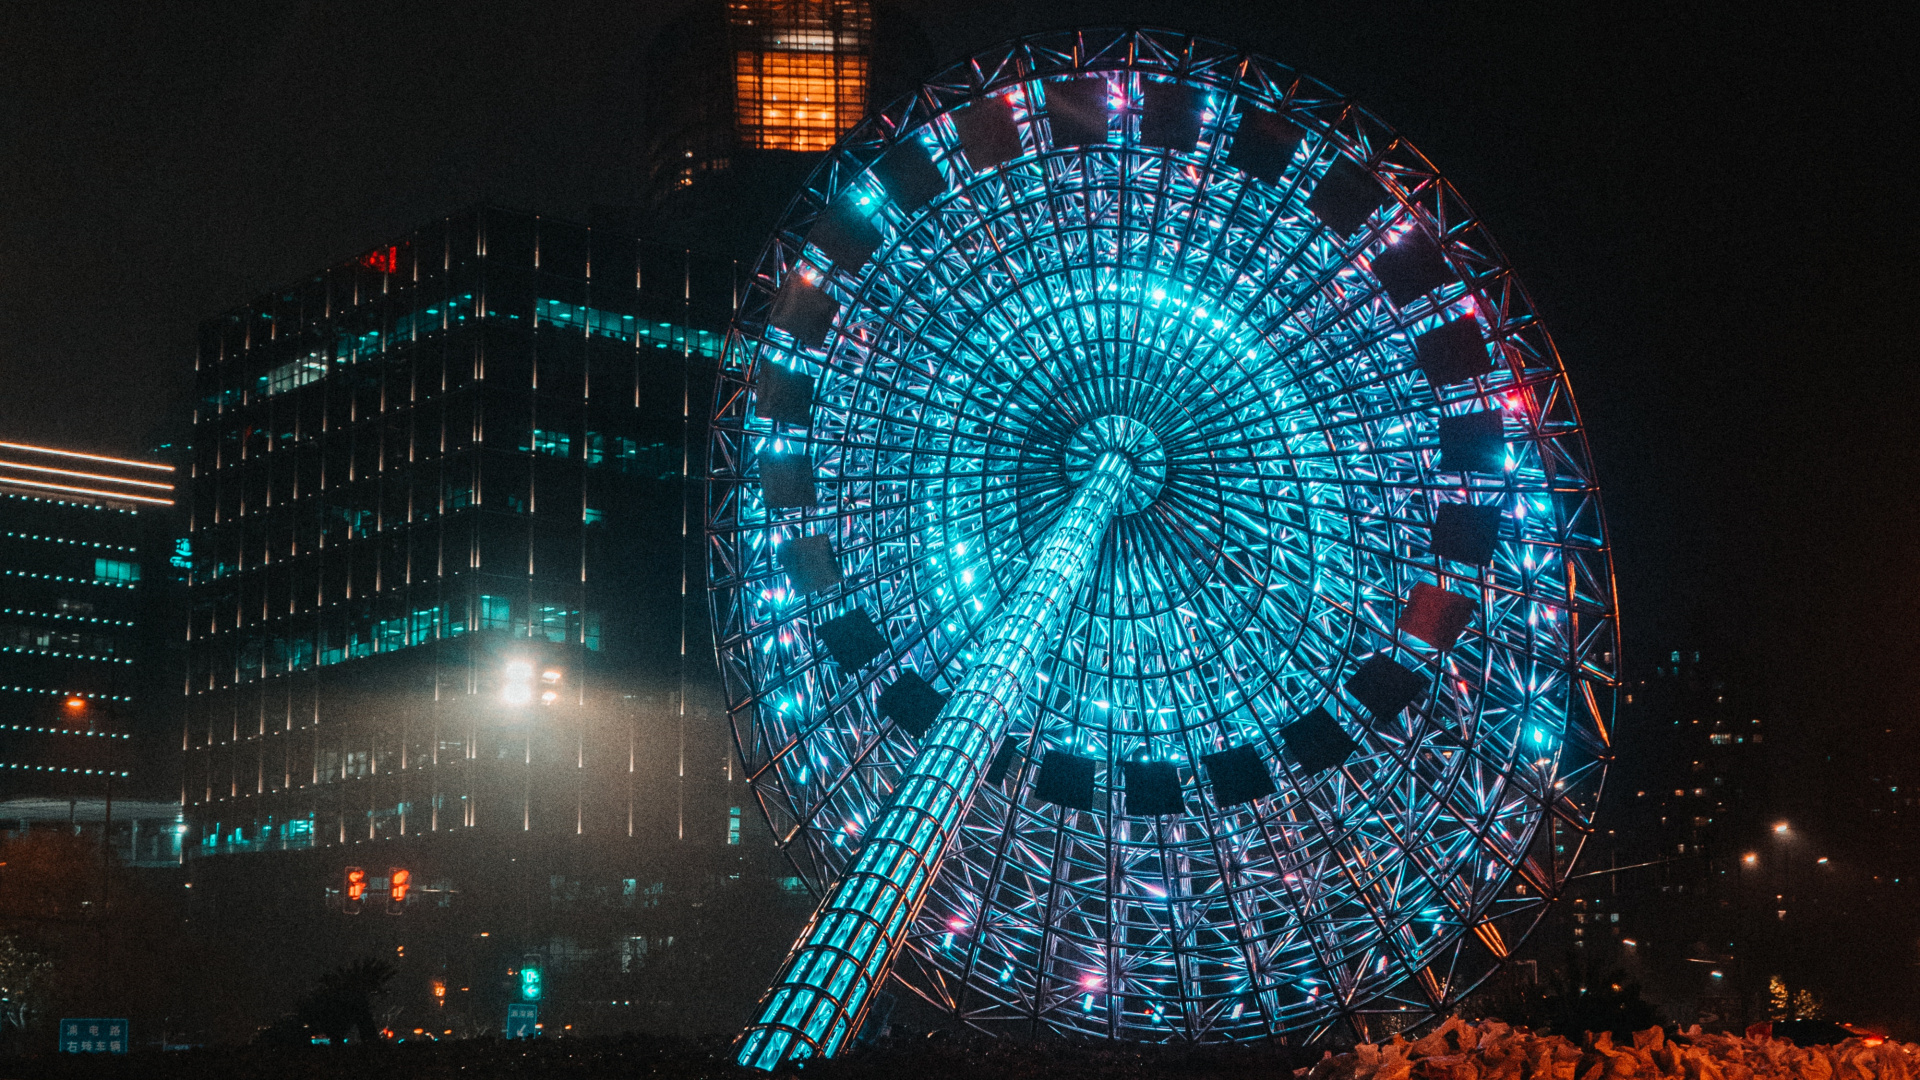 Blue and White Ferris Wheel During Night Time. Wallpaper in 1920x1080 Resolution